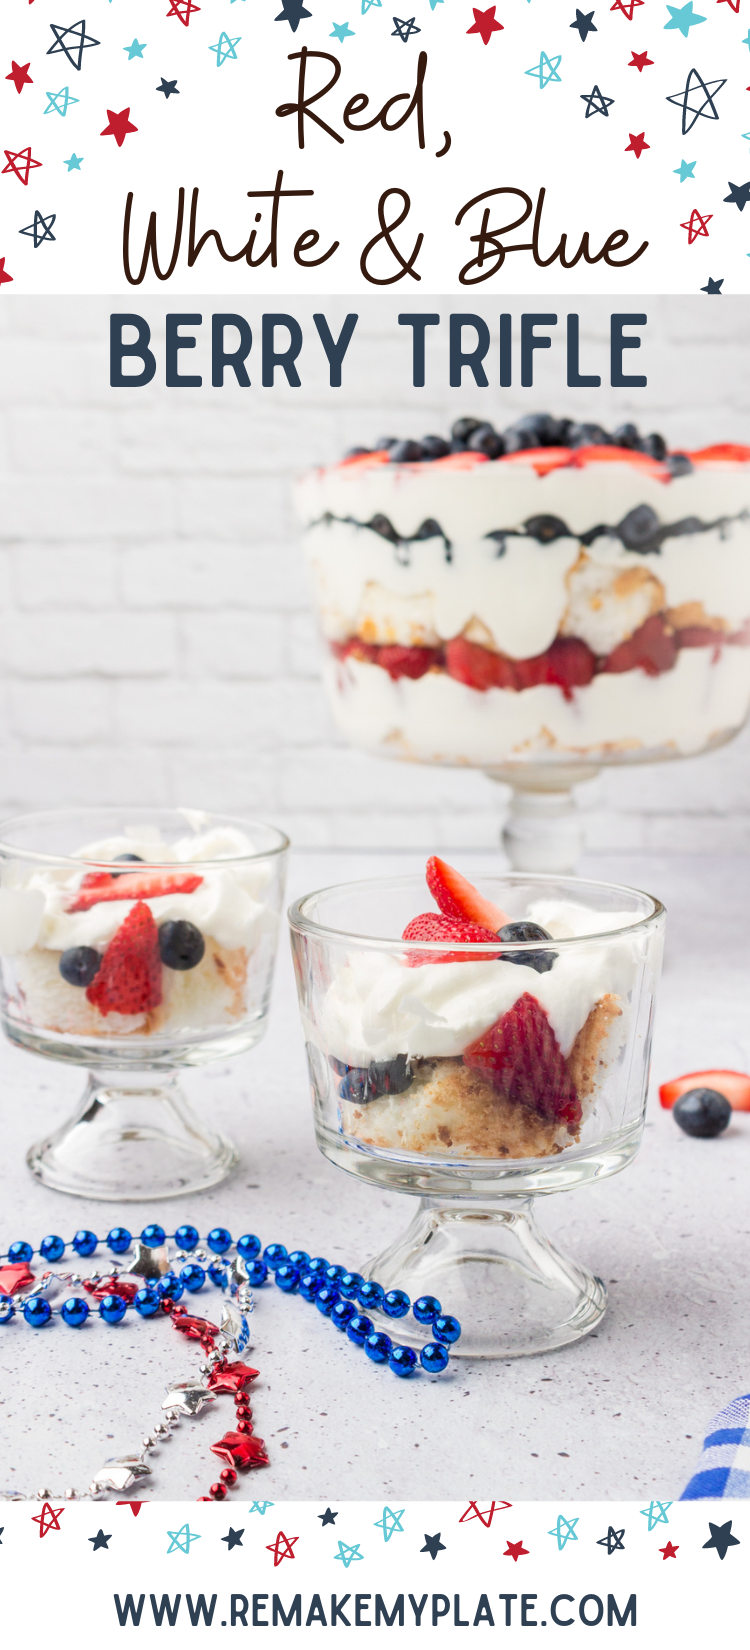 Red white and blue Berry Trifle